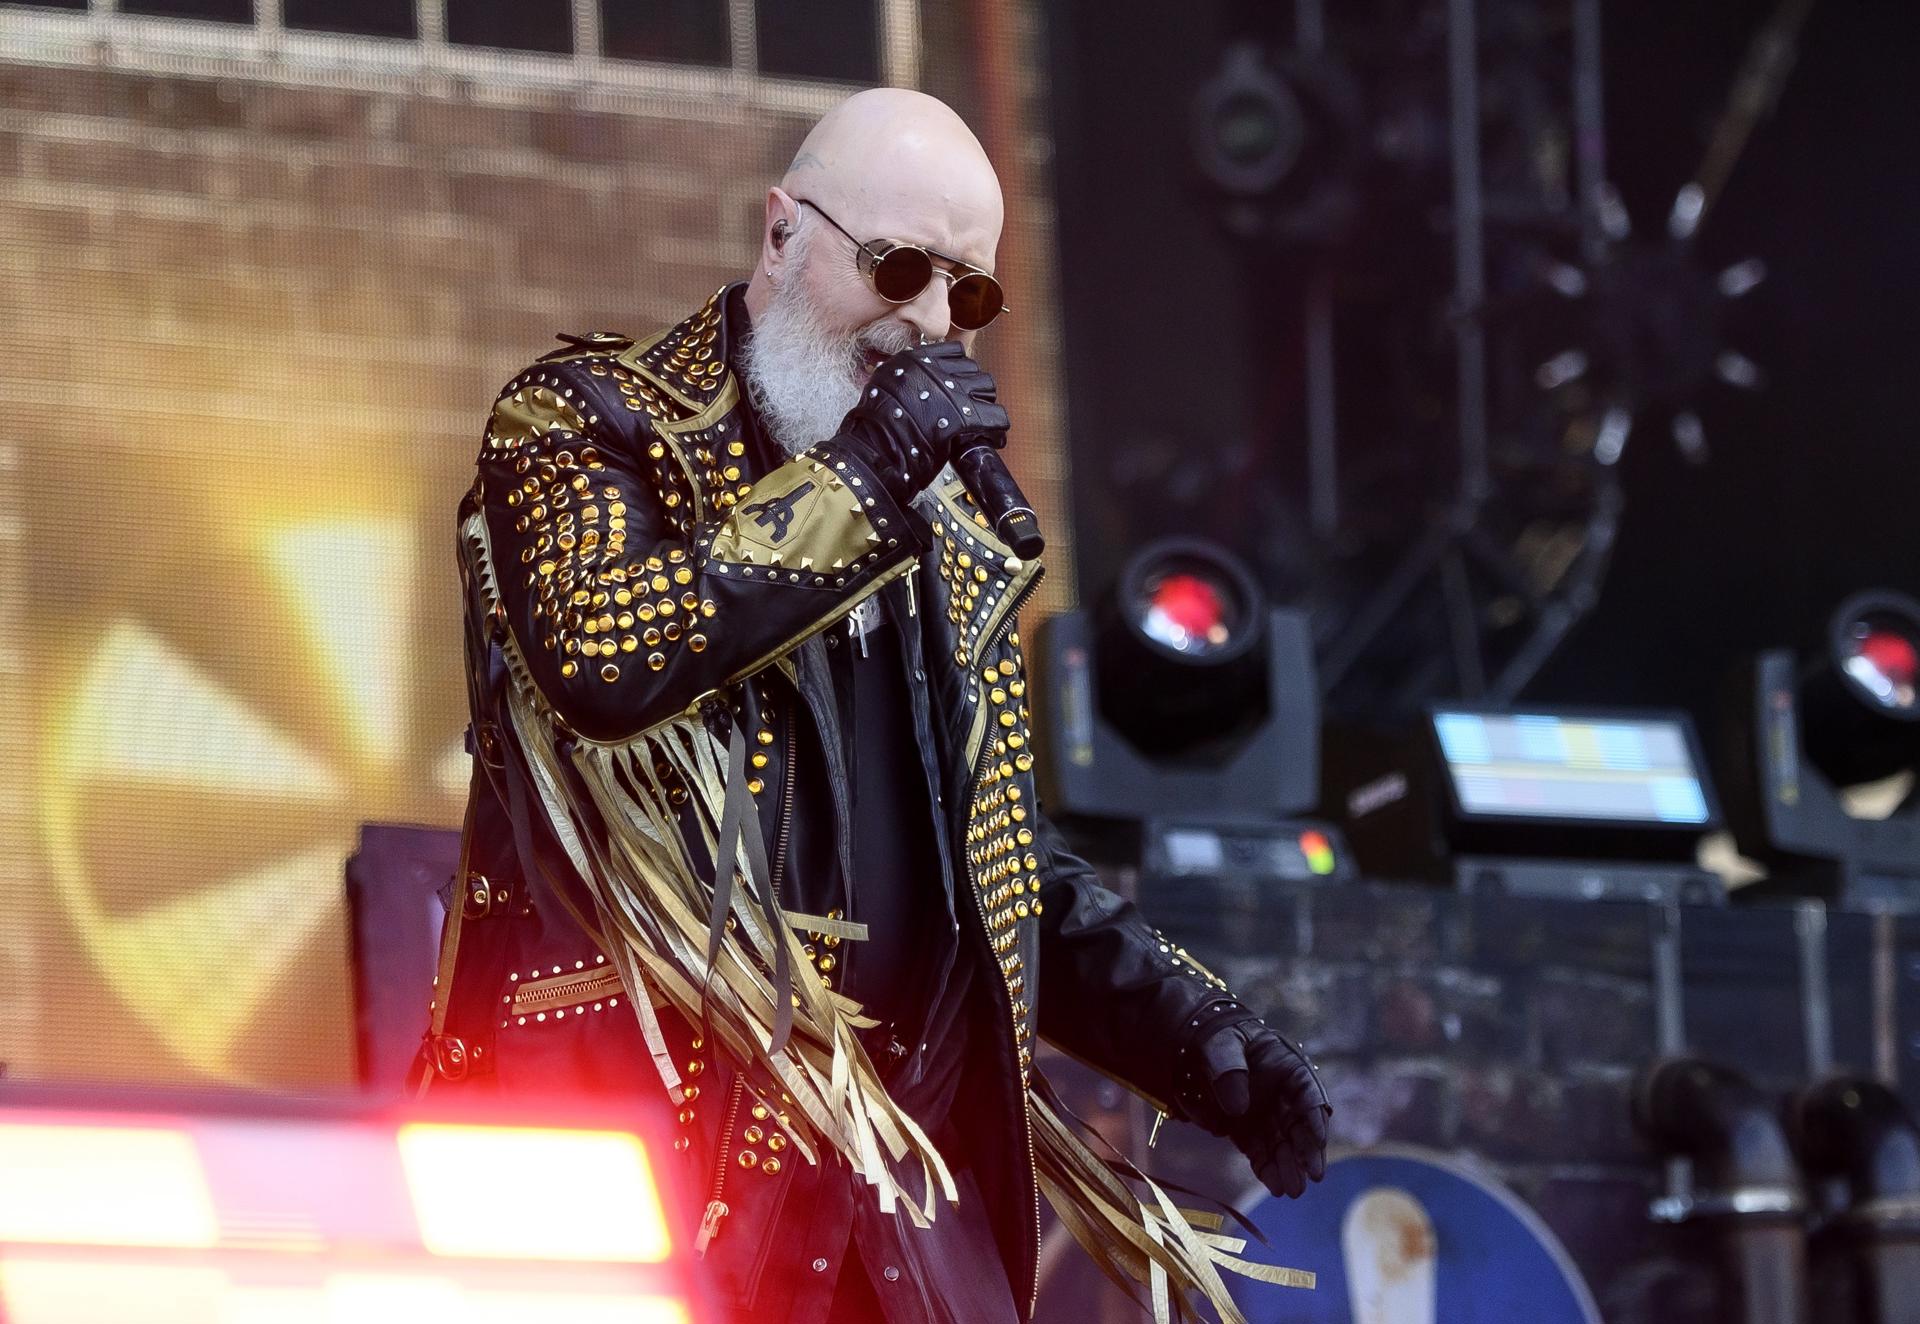 Copenhagen (Denmark), 16/06/2022.- British Band Judas Priest with singer Robert Halford in front perform on stage during the Heavy Metal Rock Festival Copenhell in Copenhagen, Denmark, 16 June 2022. The Copenhell Music Festival runs from 15 to 18 June with international acts performing on four stages. (Abierto, Dinamarca, Copenhague) EFE/EPA/Torben Christensen DENMARK OUT[DENMARK OUT]